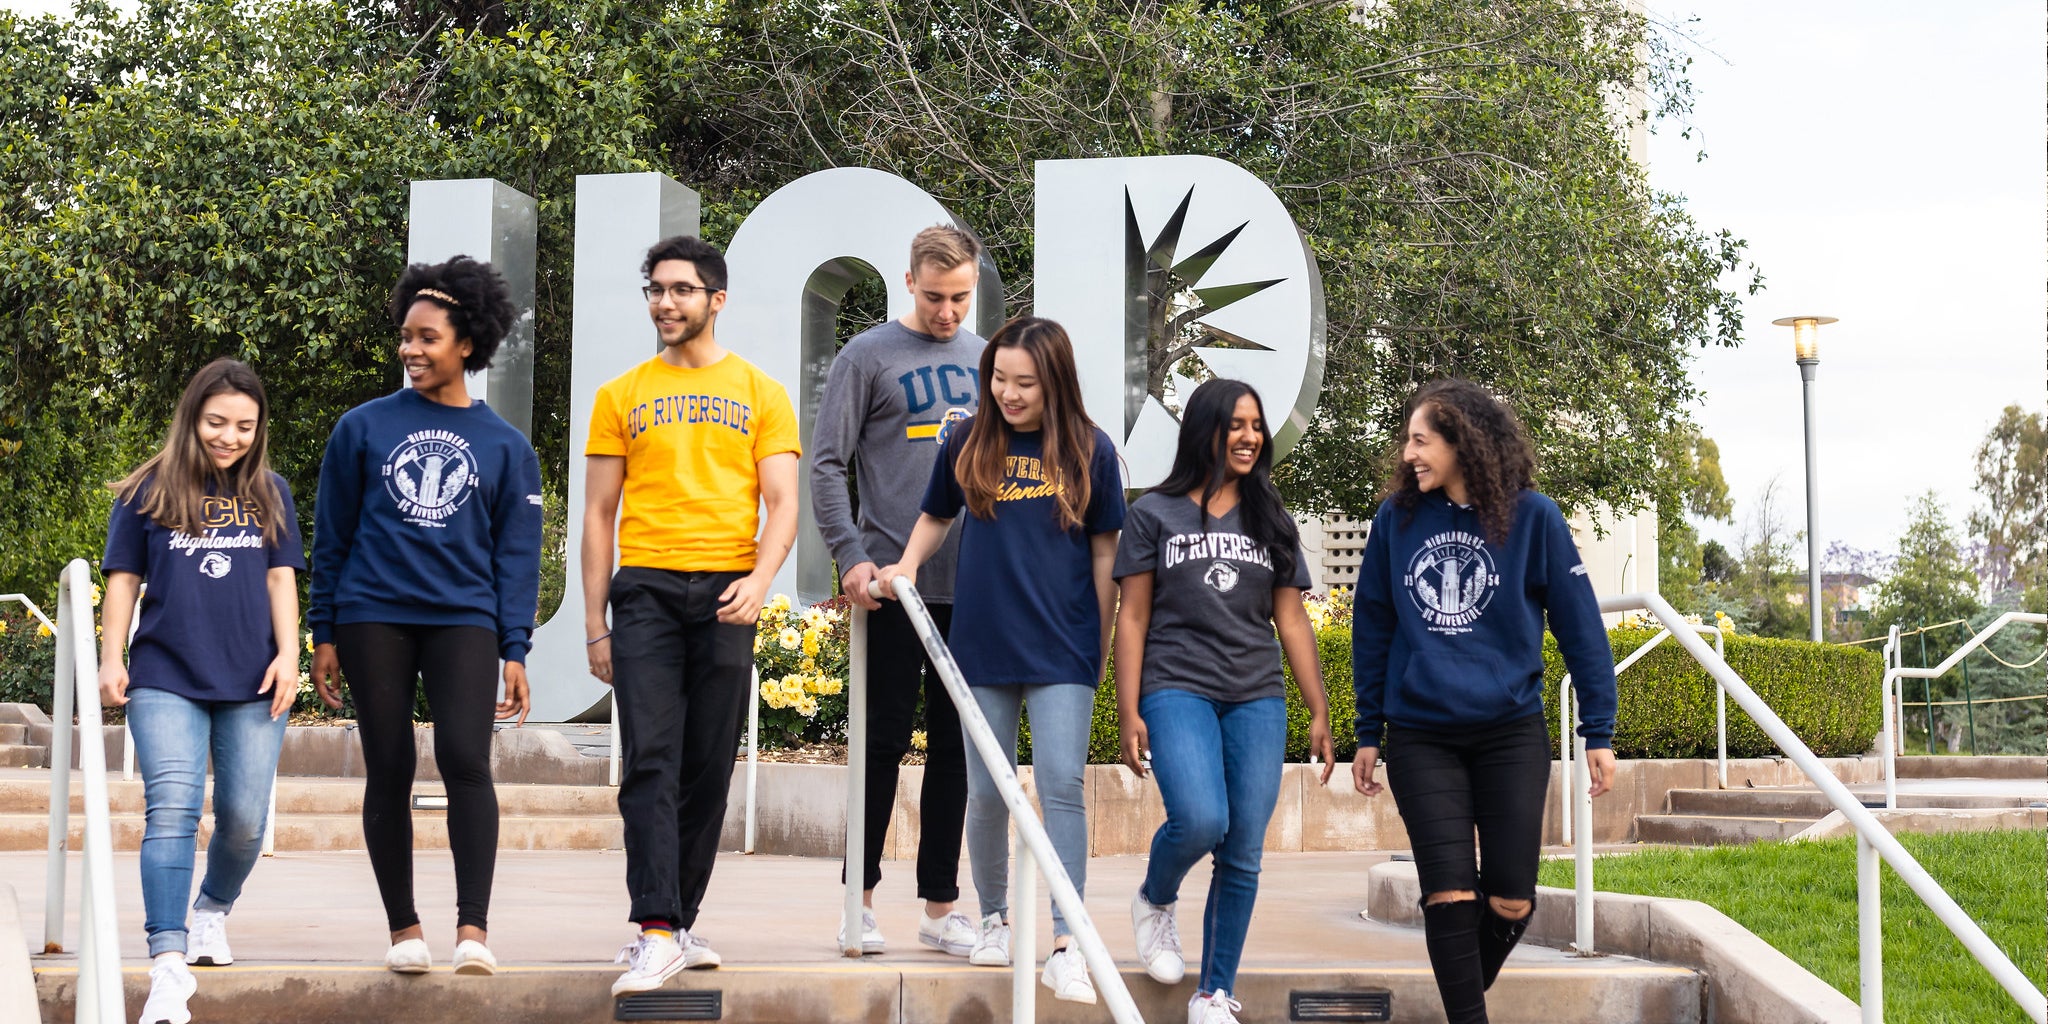 A group of UCR students talk as they walk down the steps in front of the UCR letter sculpture.